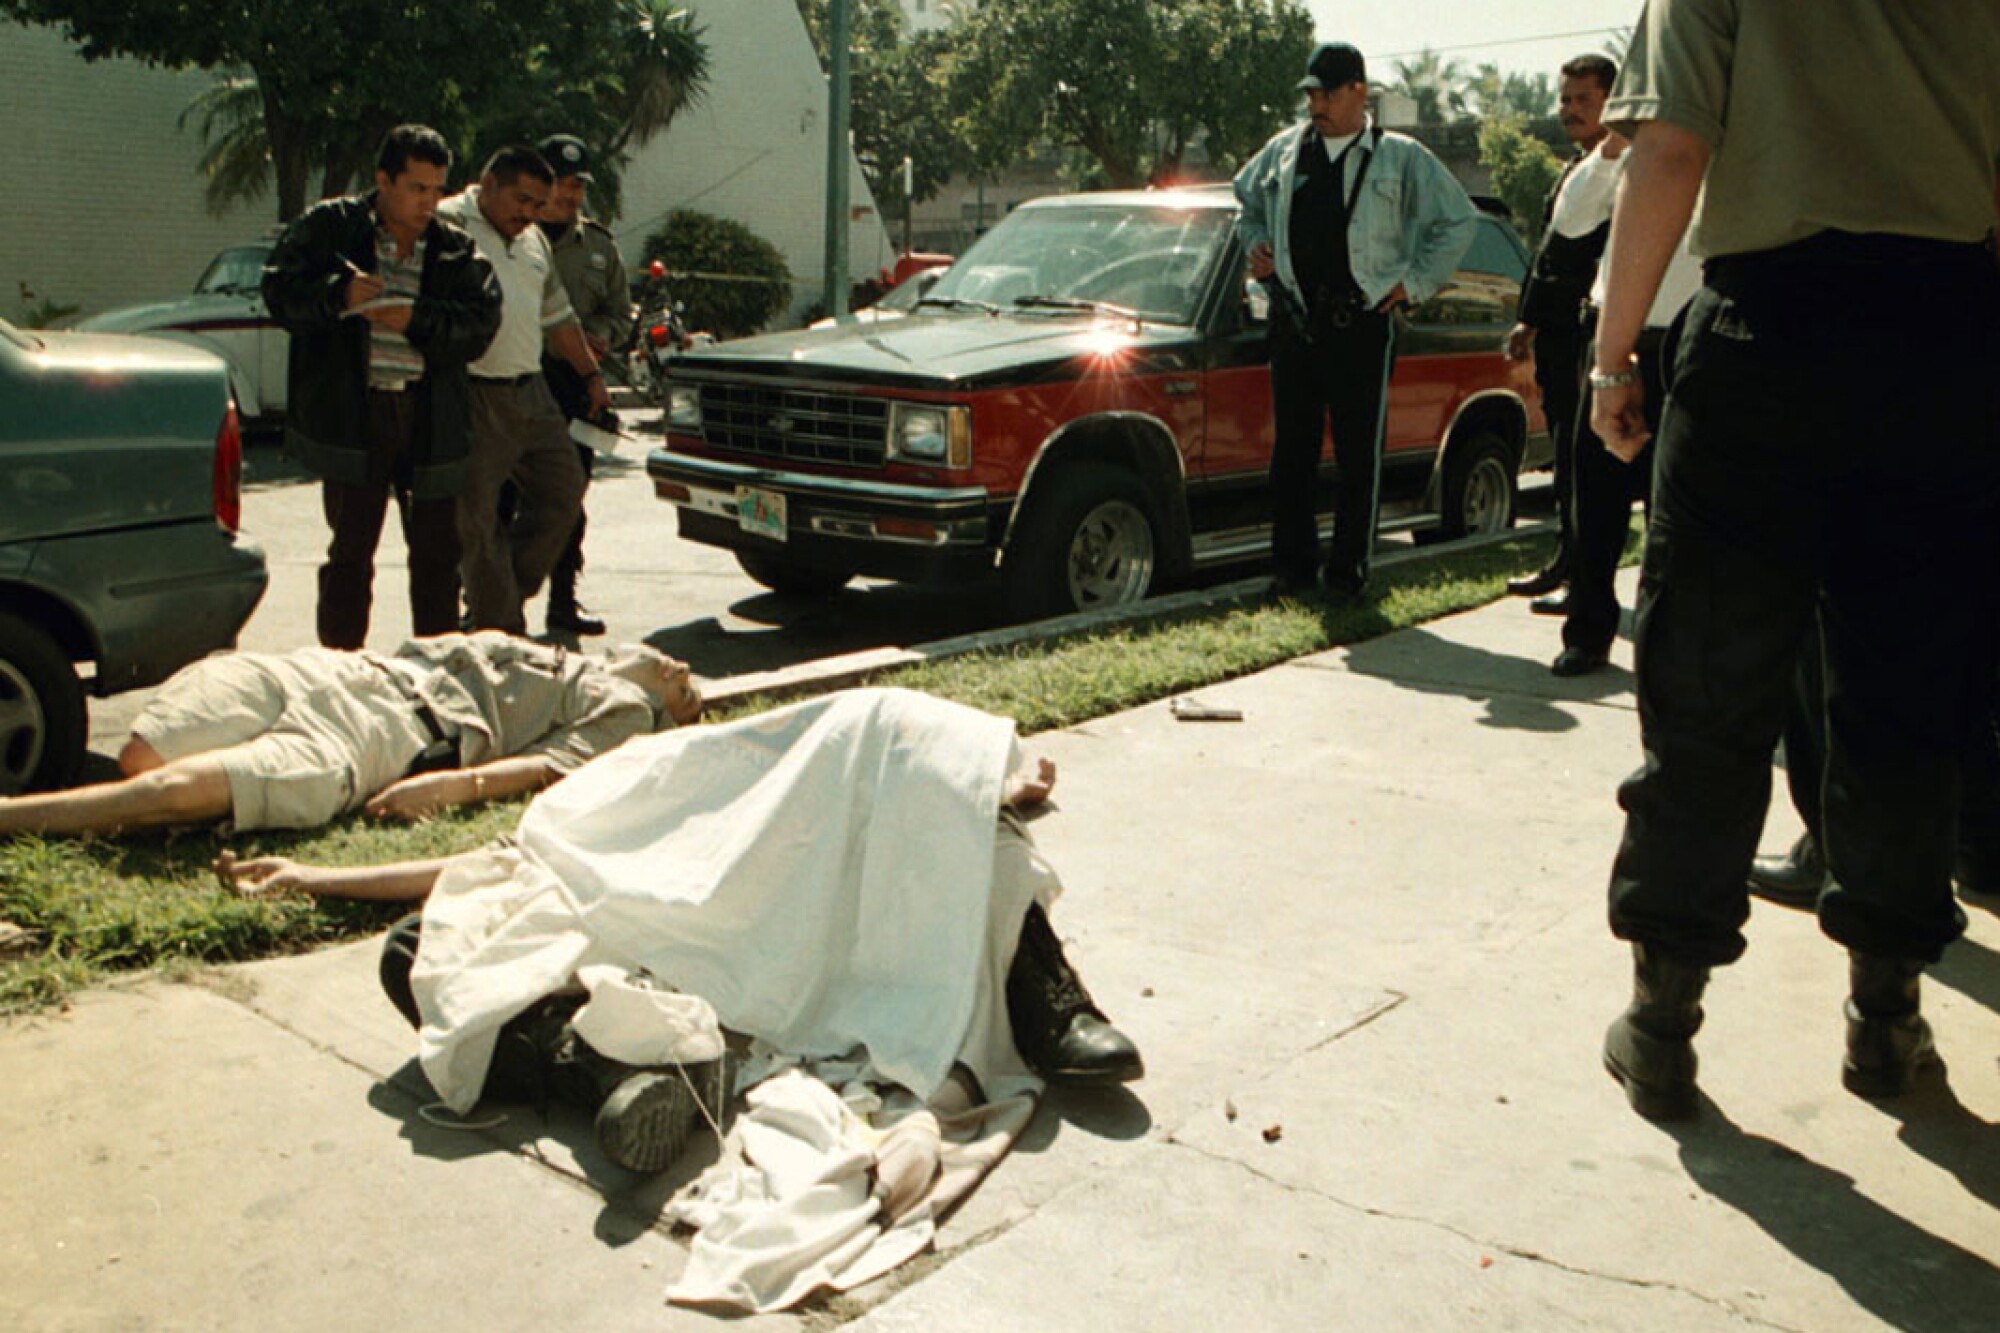 The bodies of Ramón Arellano Félix (left) and Sinaloa state police agent Angel Antonio Arias are shown following a shootout.